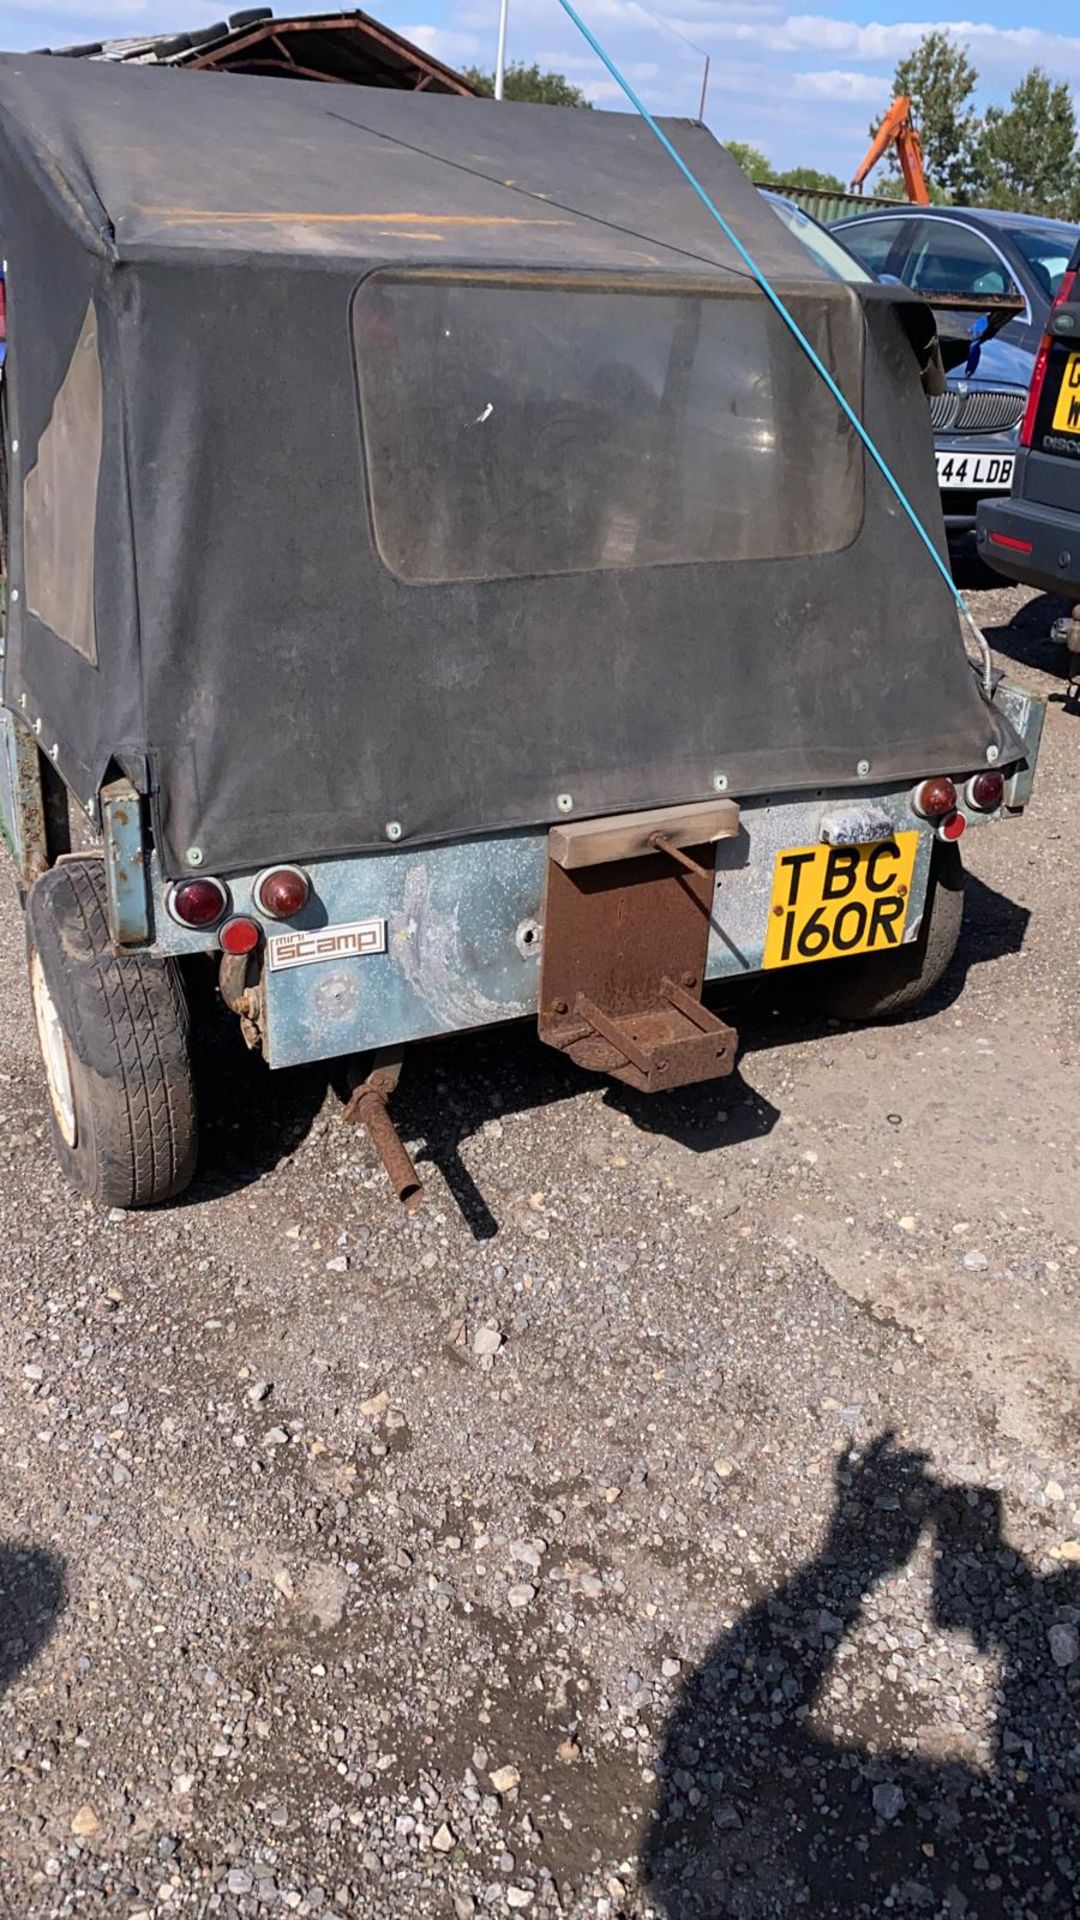 1977 MINISCAMP BUGGY 998CC PETROL SILVER, V5 PRESENT - BARN FIND! - Image 7 of 17